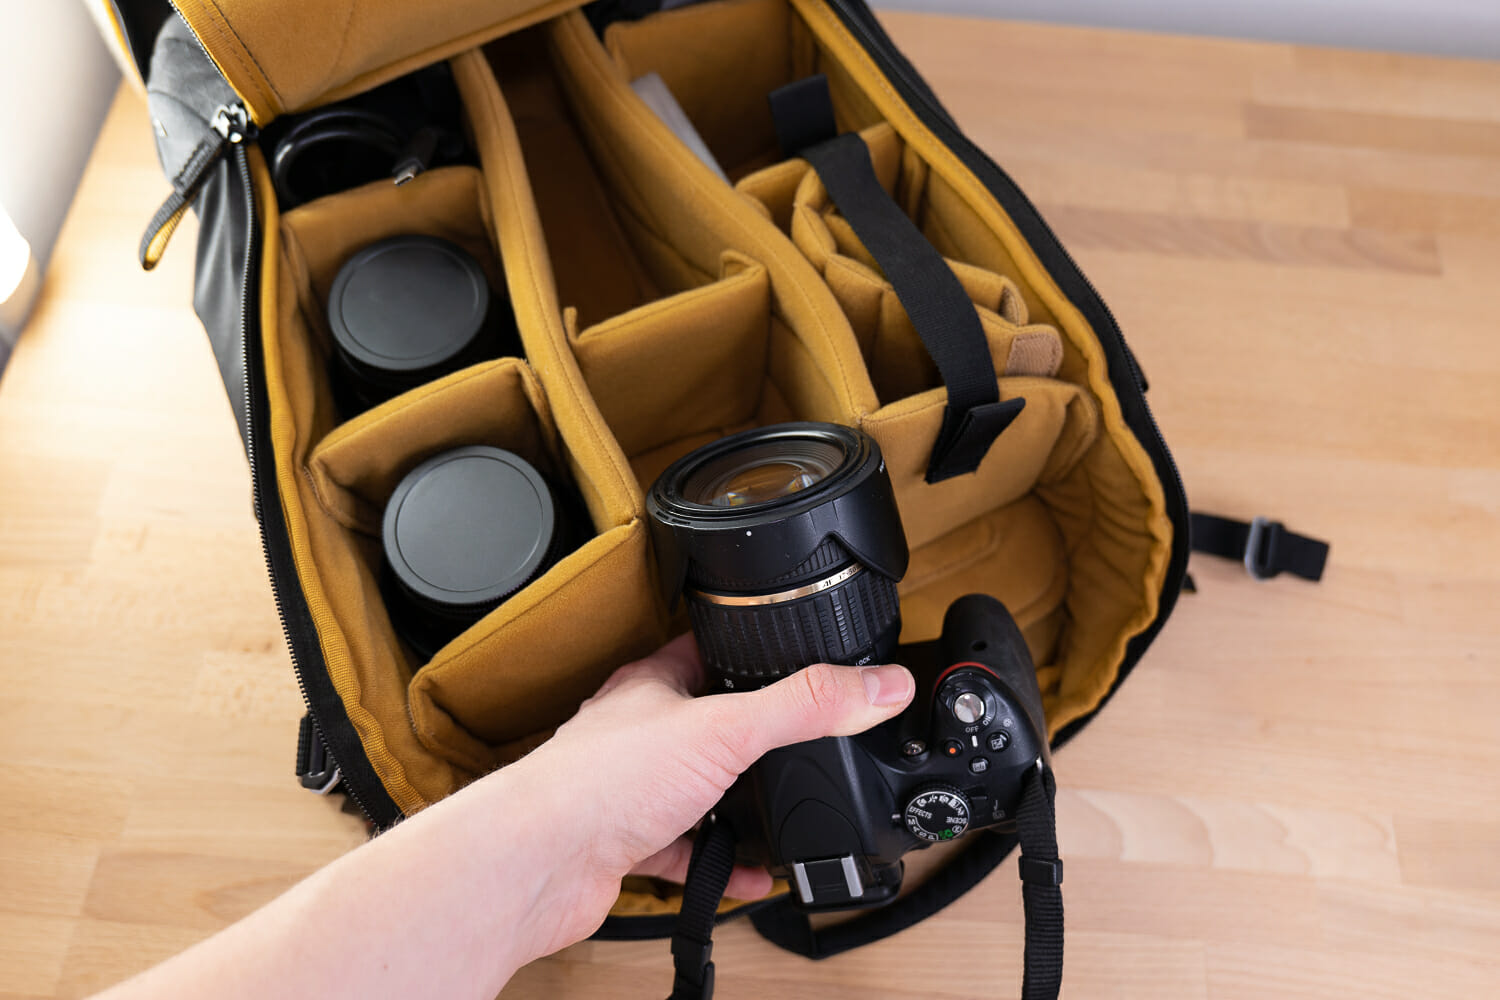 Placing a camera into a camera bag with multiple lenses